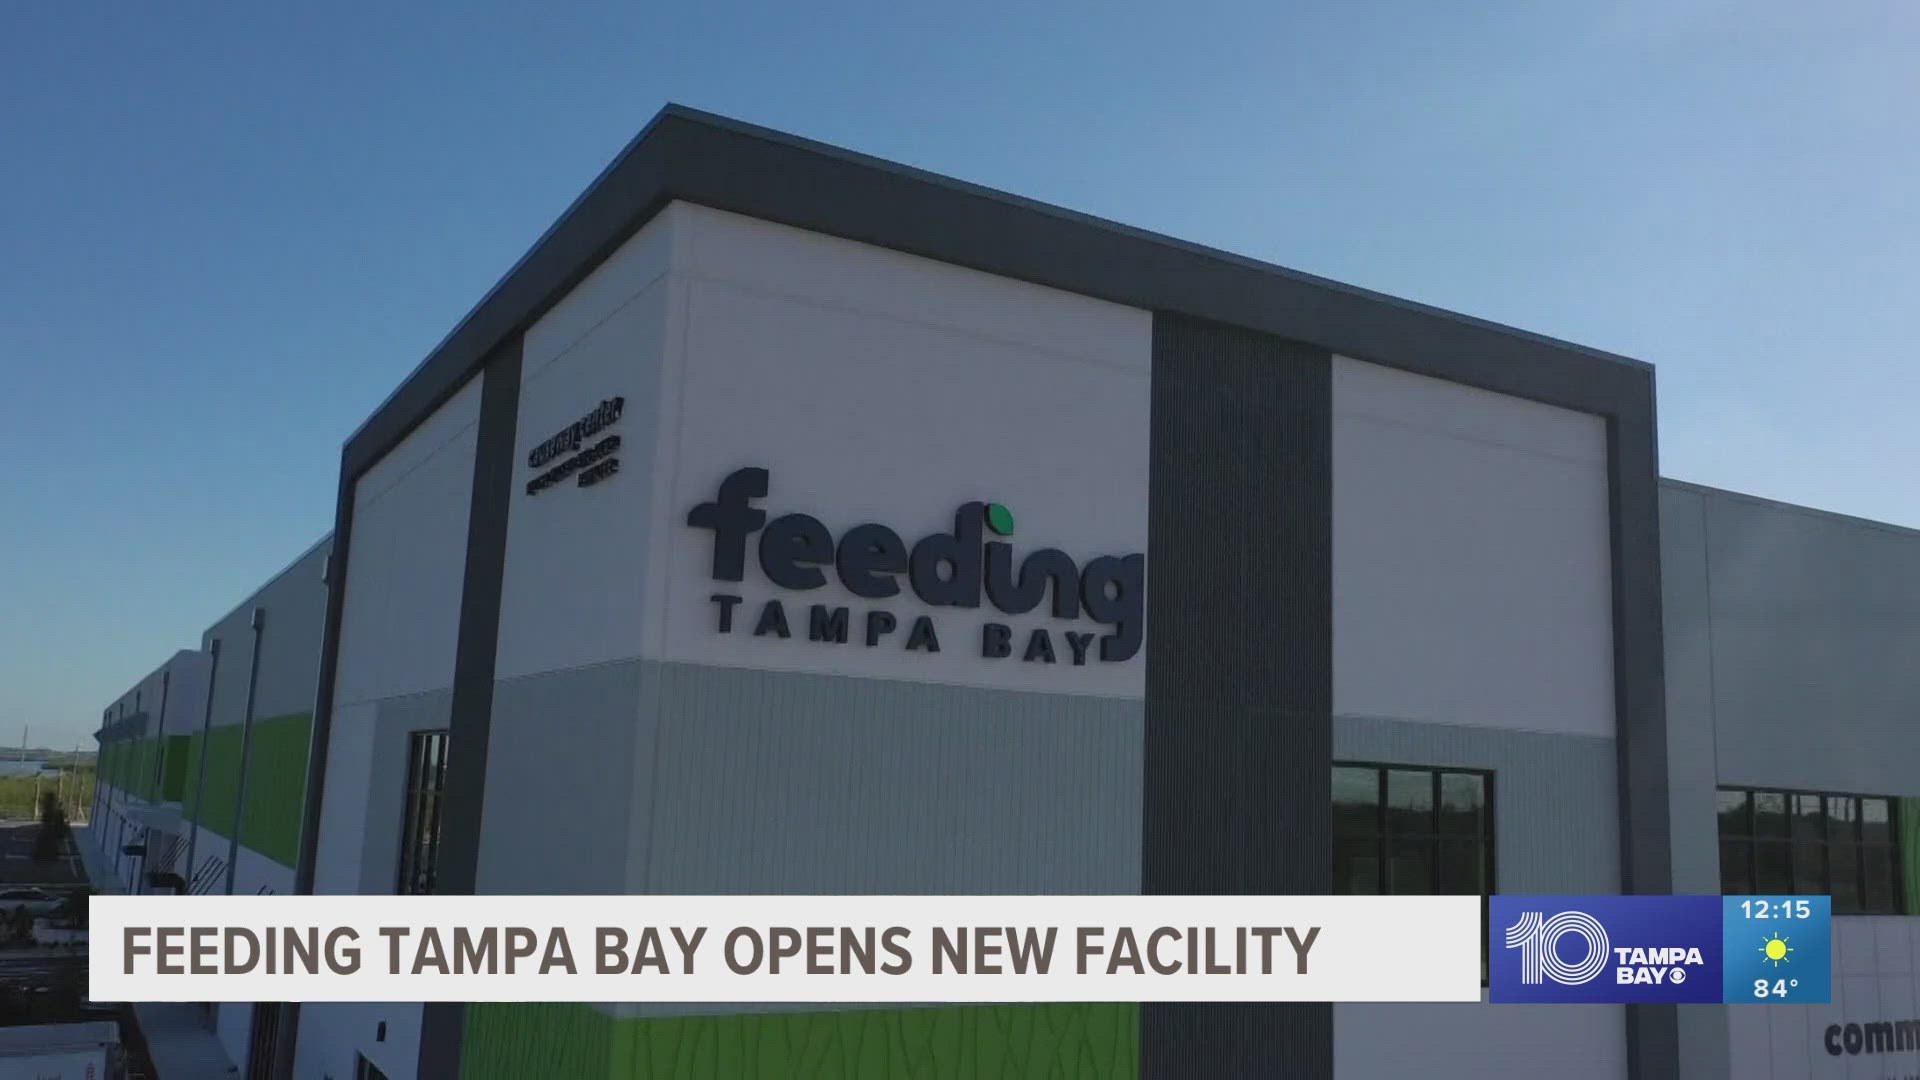 The new facility has become a hub of hope and and nourishment for millions in the Tampa Bay area.